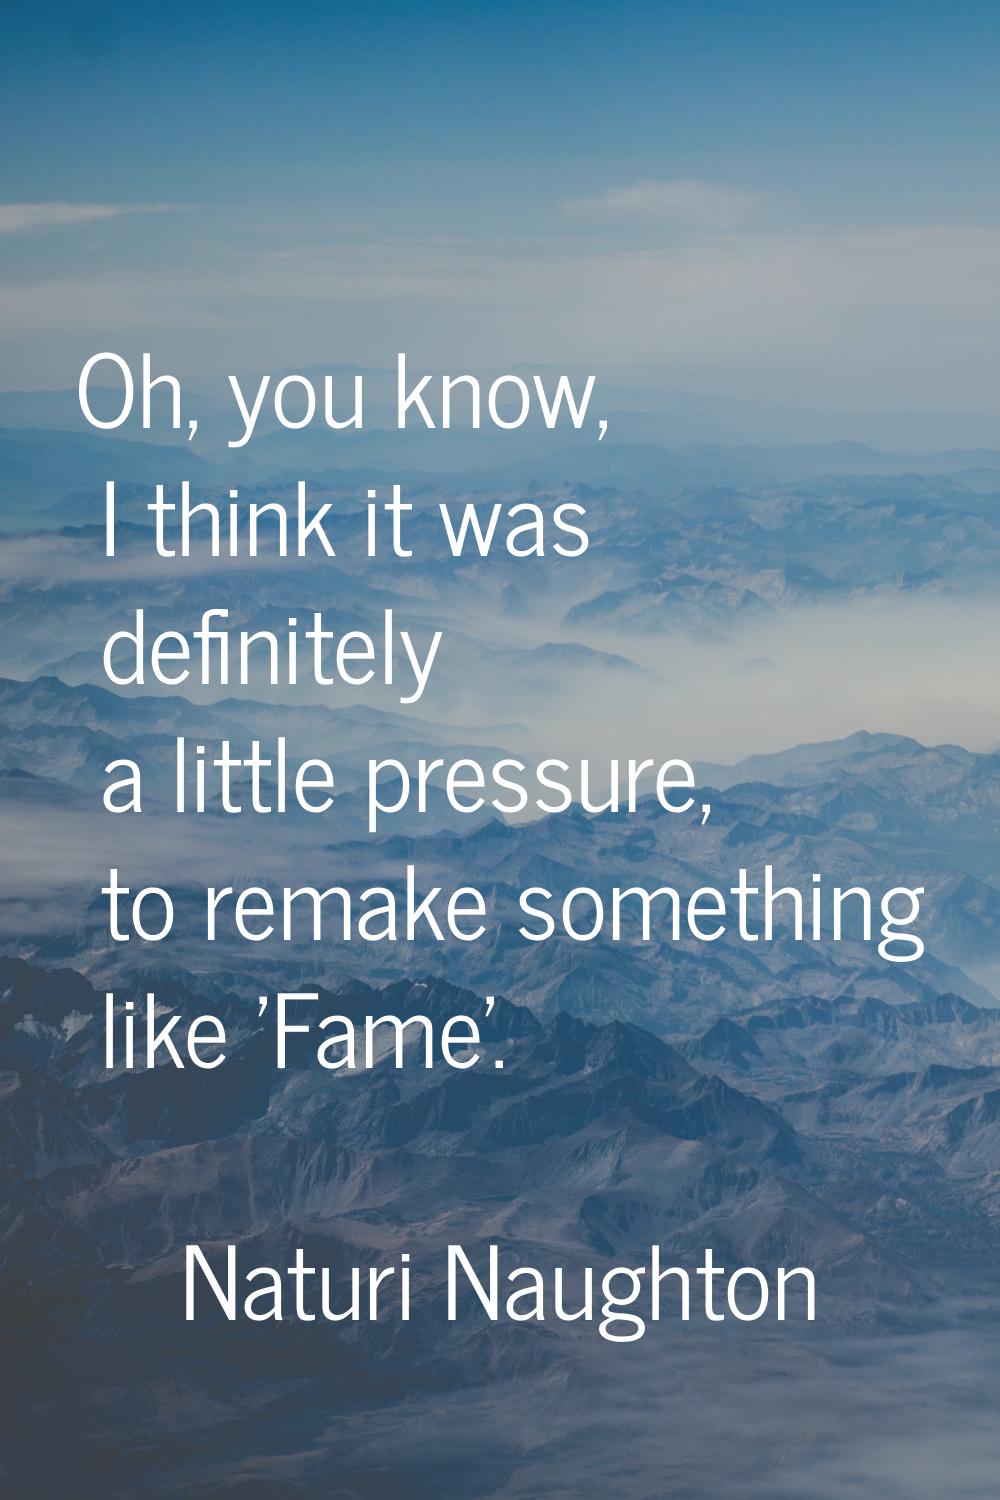 Oh, you know, I think it was definitely a little pressure, to remake something like 'Fame'.